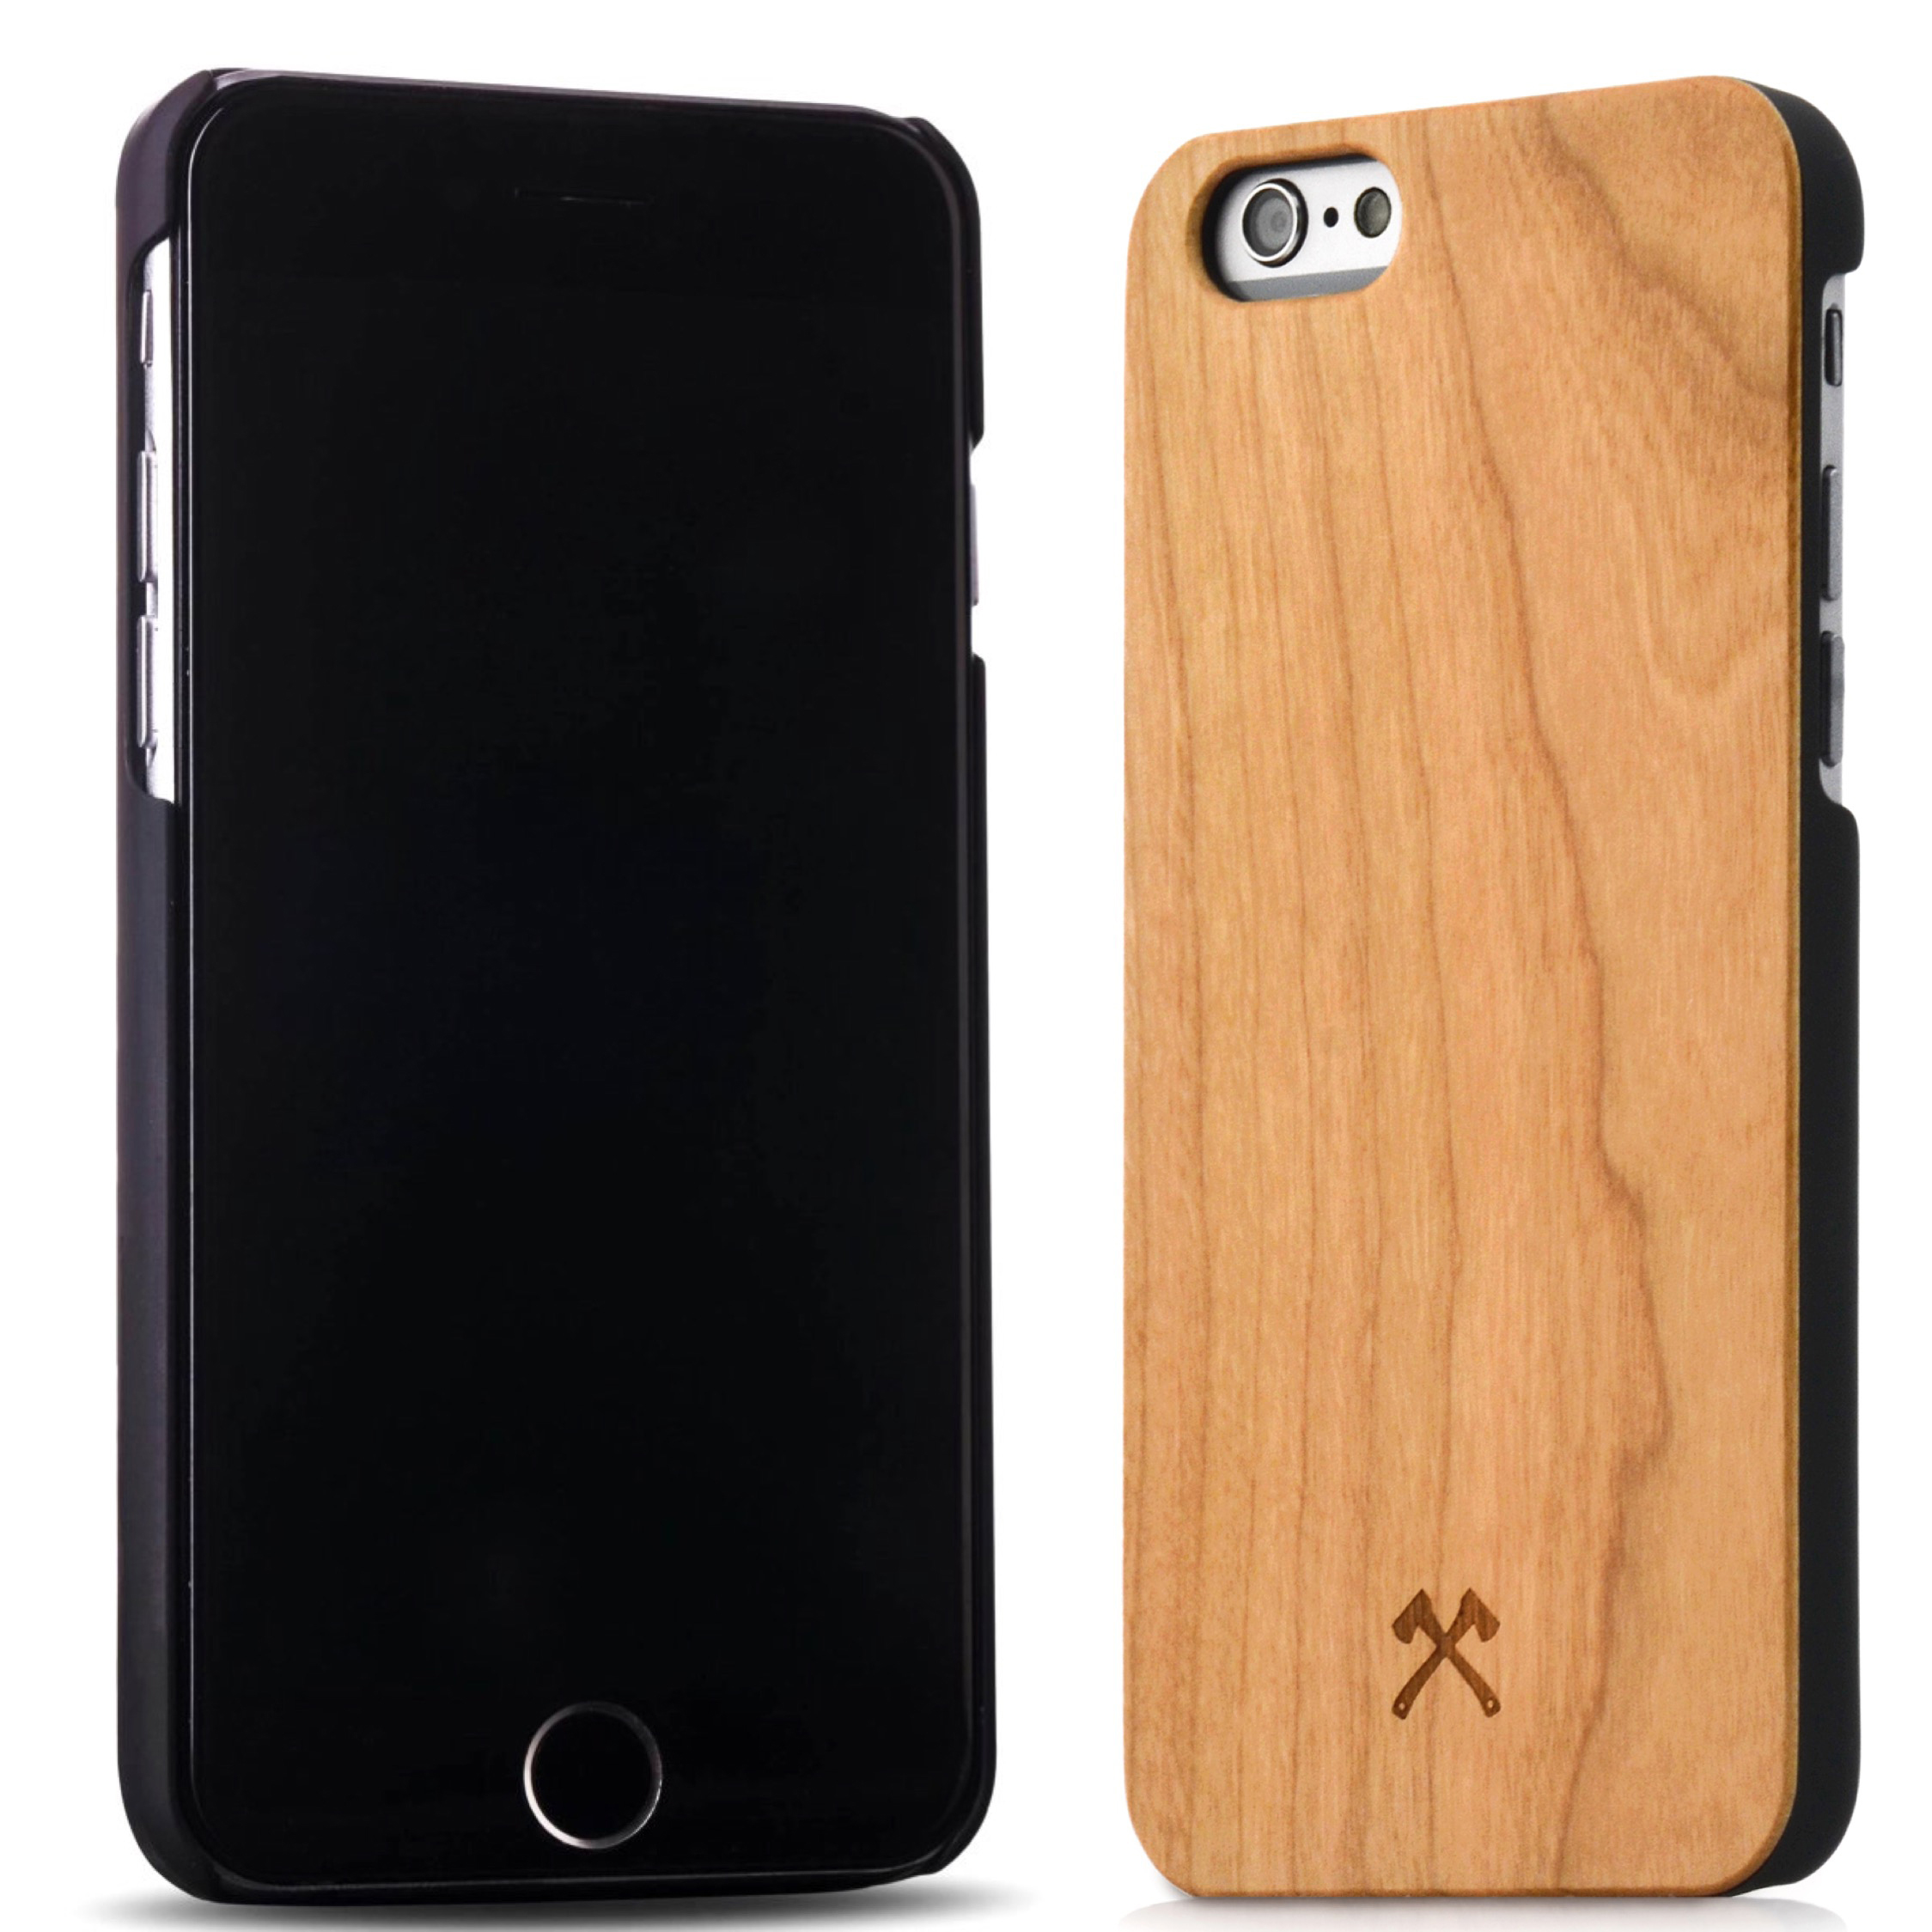 6, Backcover, Apple, iPhone Classic, Kirsch/Schwarz EcoCase WOODCESSORIES 6s, iPhone